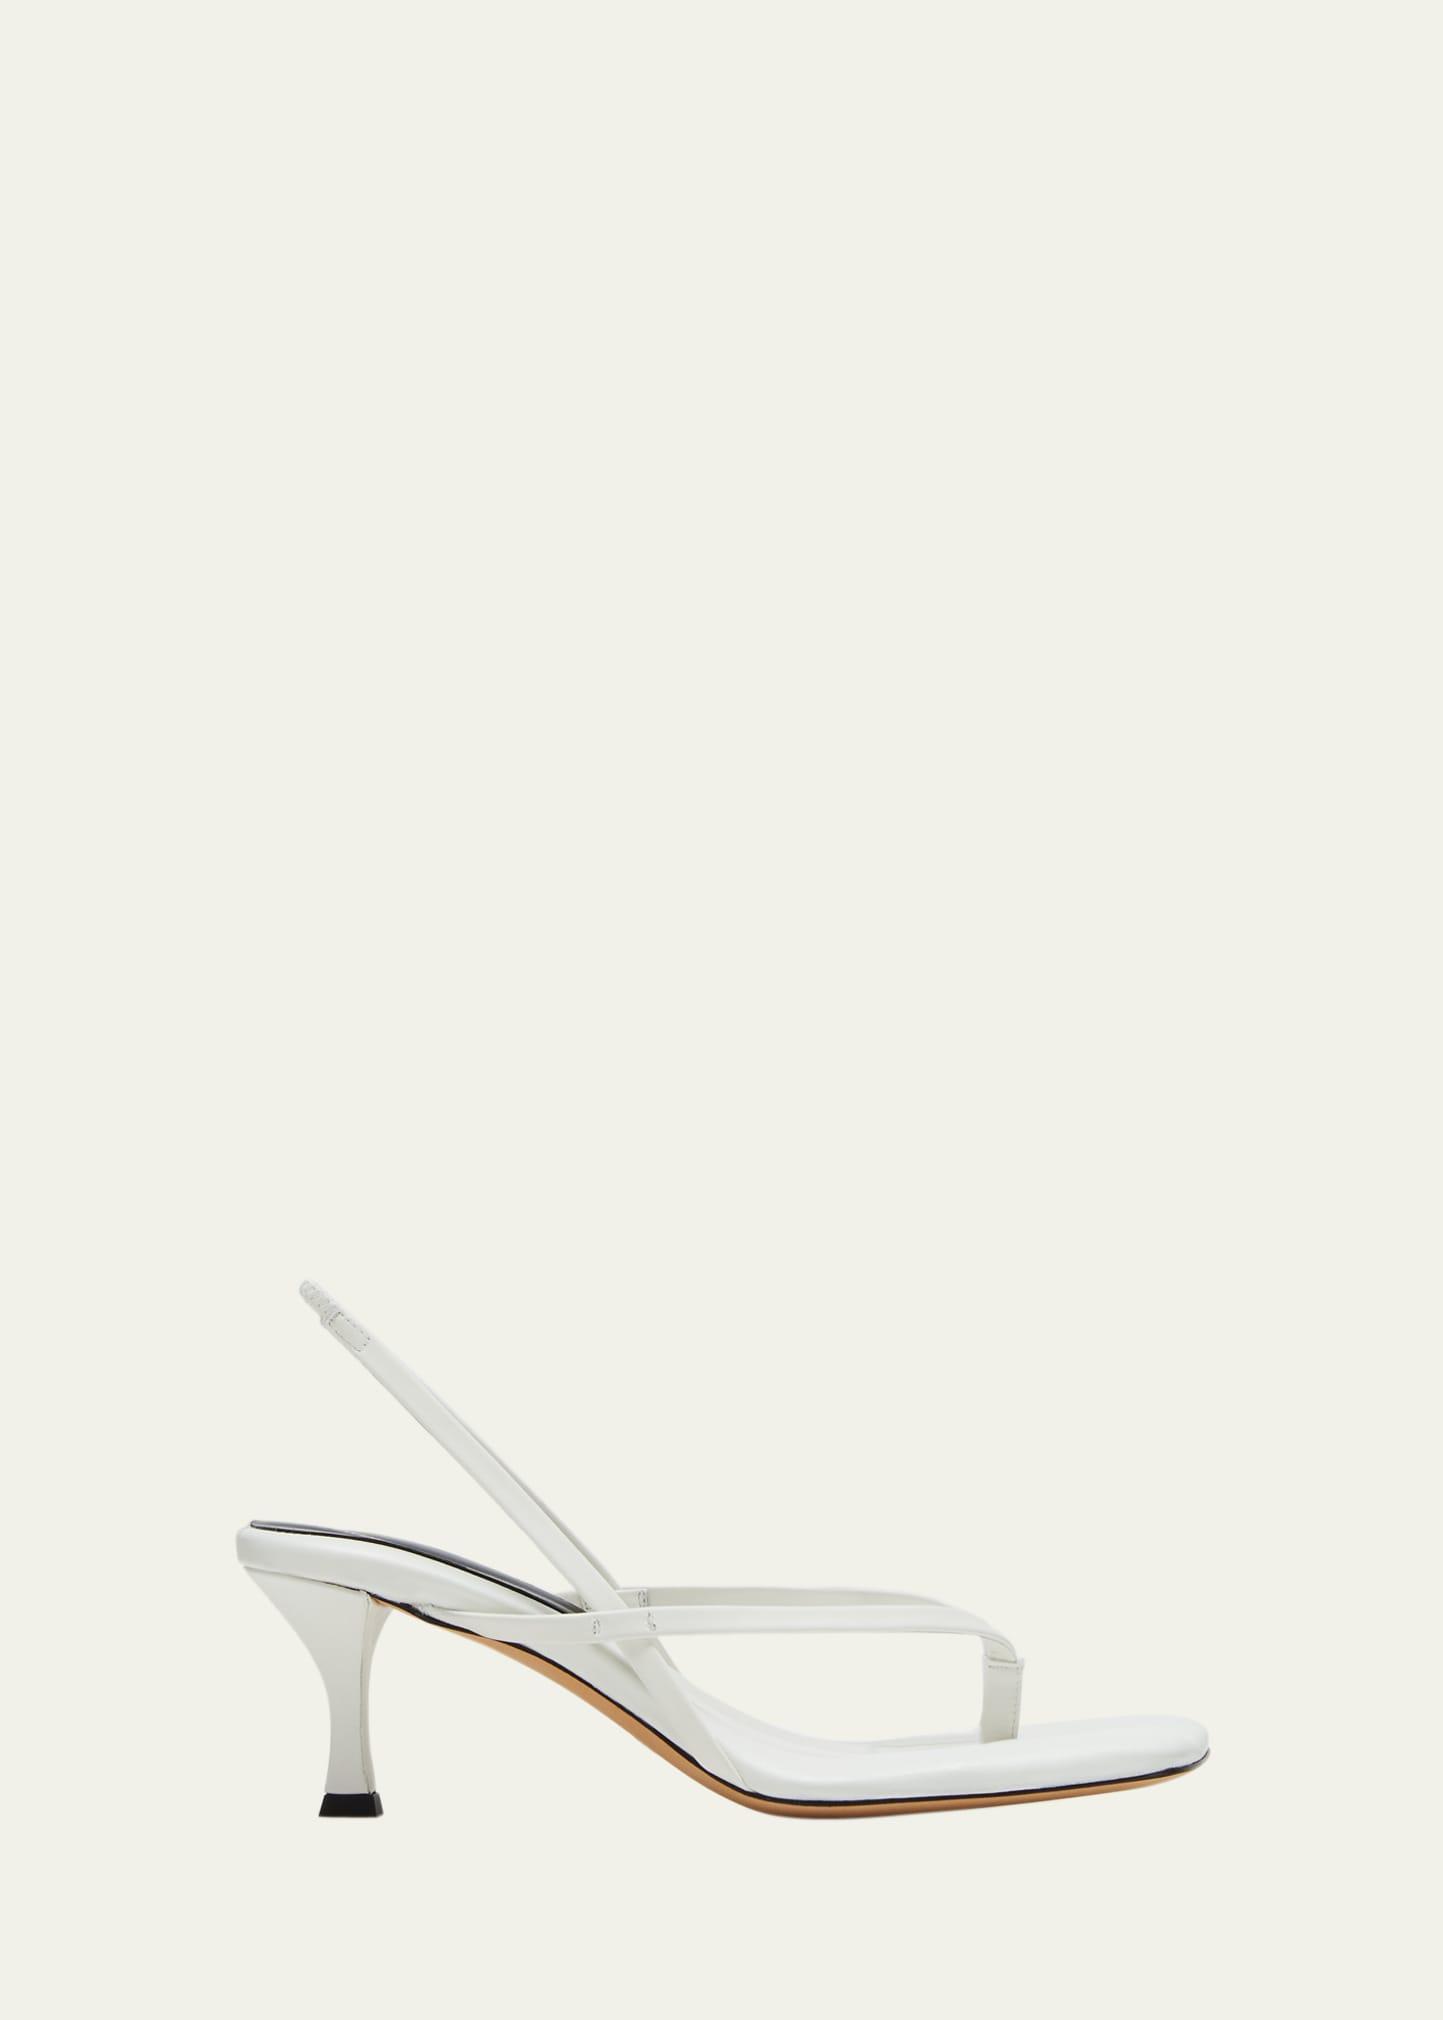 Proenza Schouler Womens Square Toe Thong Sandals Product Image